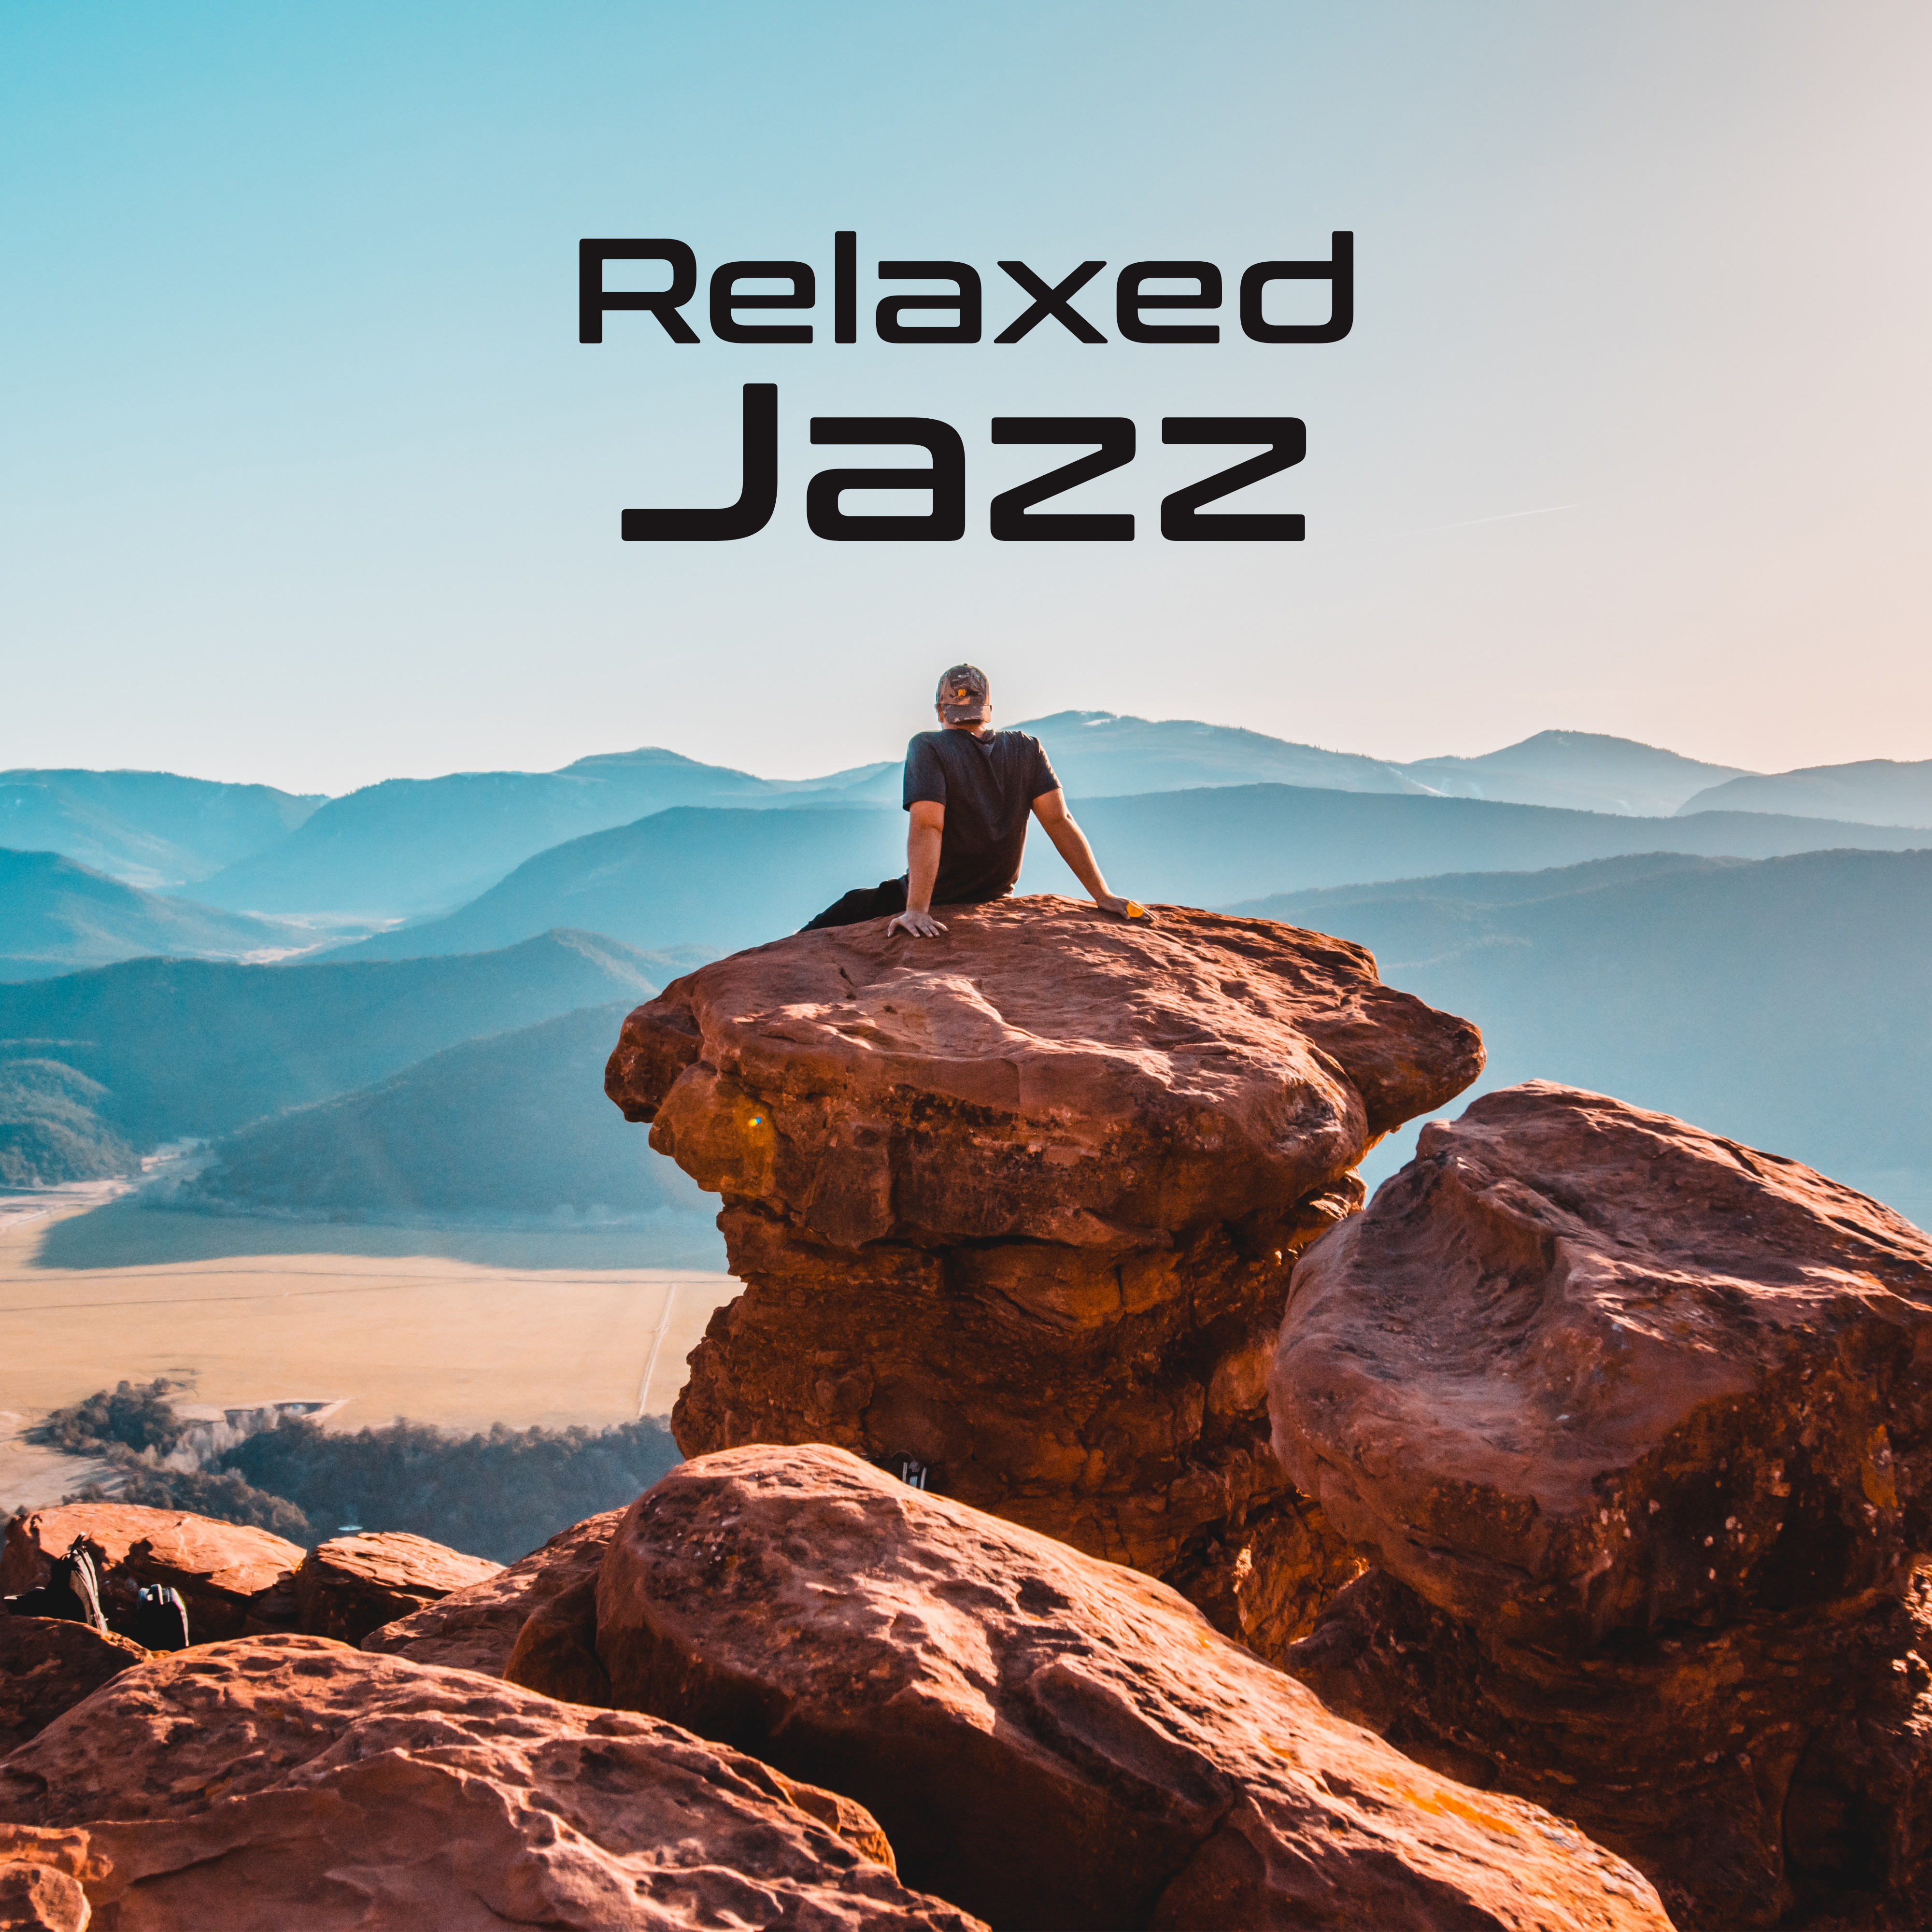 Relaxed Jazz – Best Instrumental Music to Rest, Anti Stress Music, Sounds of Jazz to Calm Down, Relaxation, Peaceful Mind